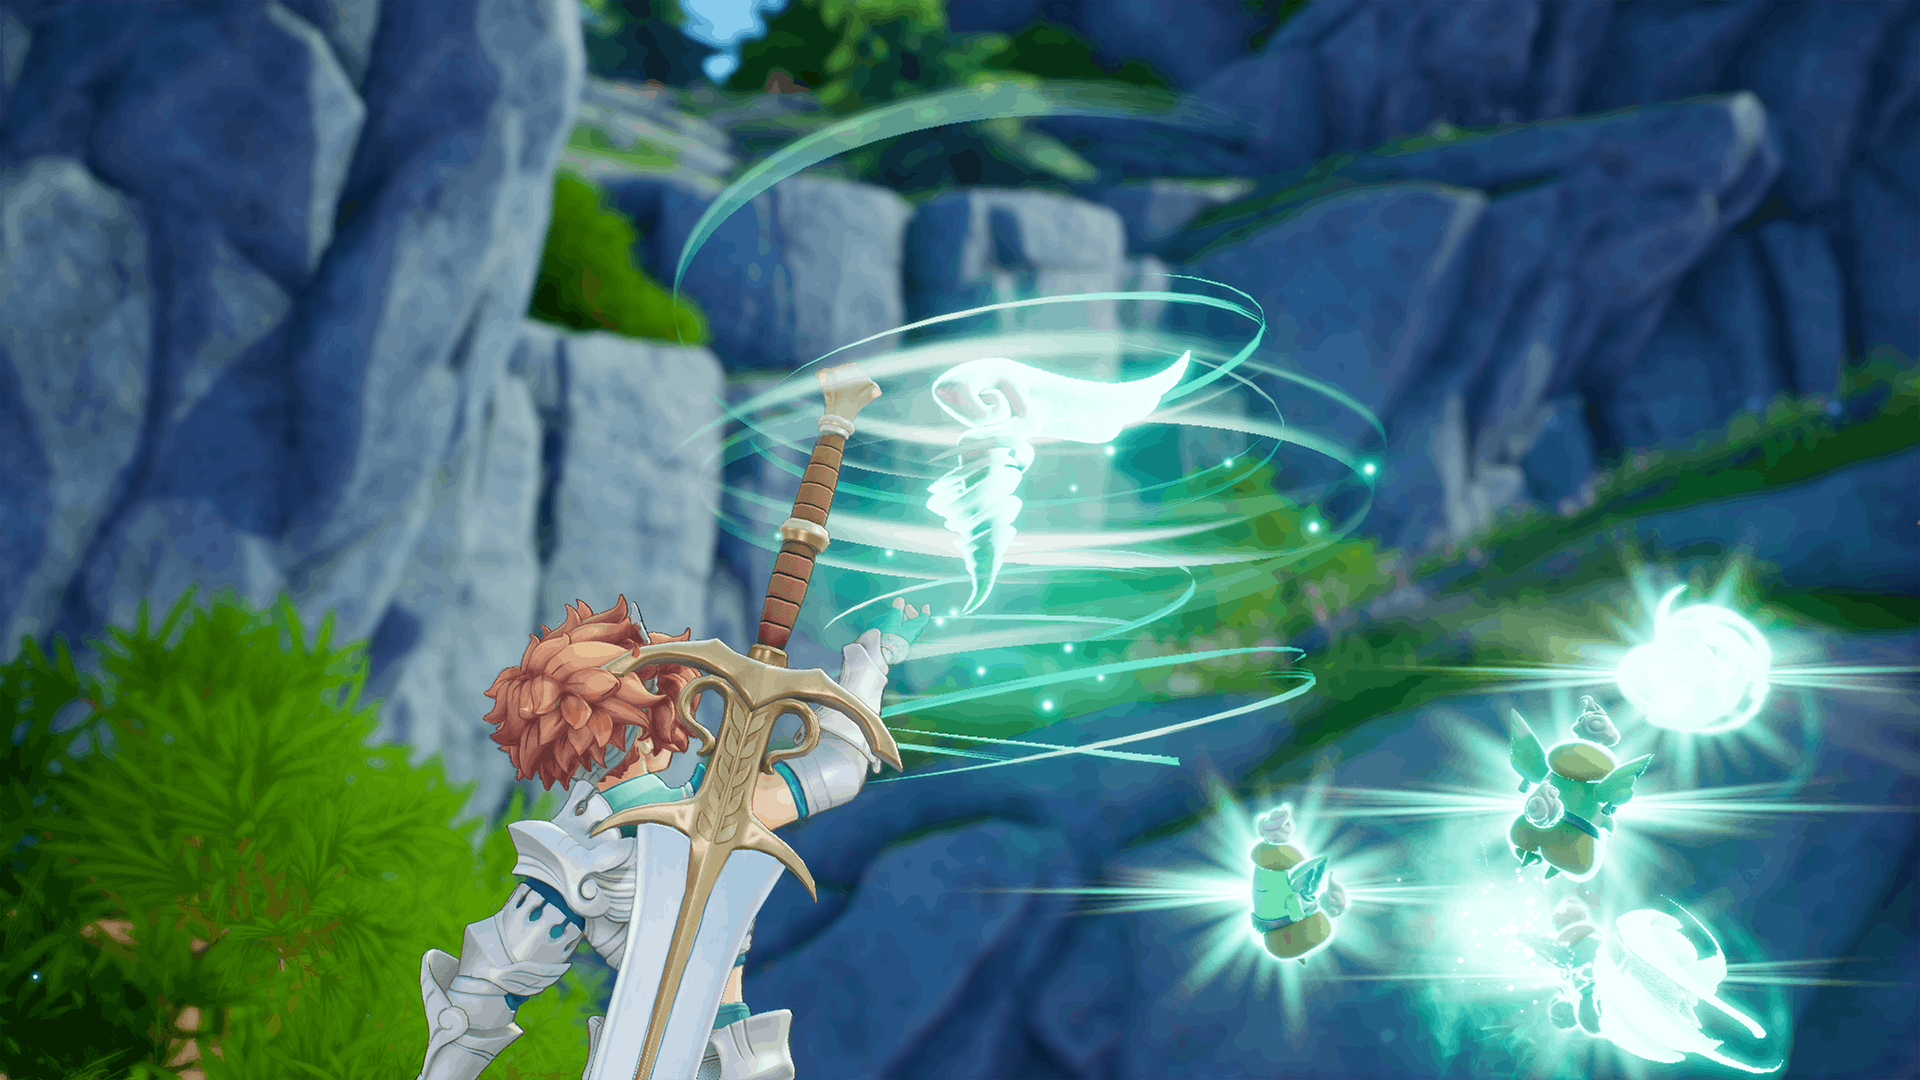 Val using the Vessel of Wind to manipulate the world.